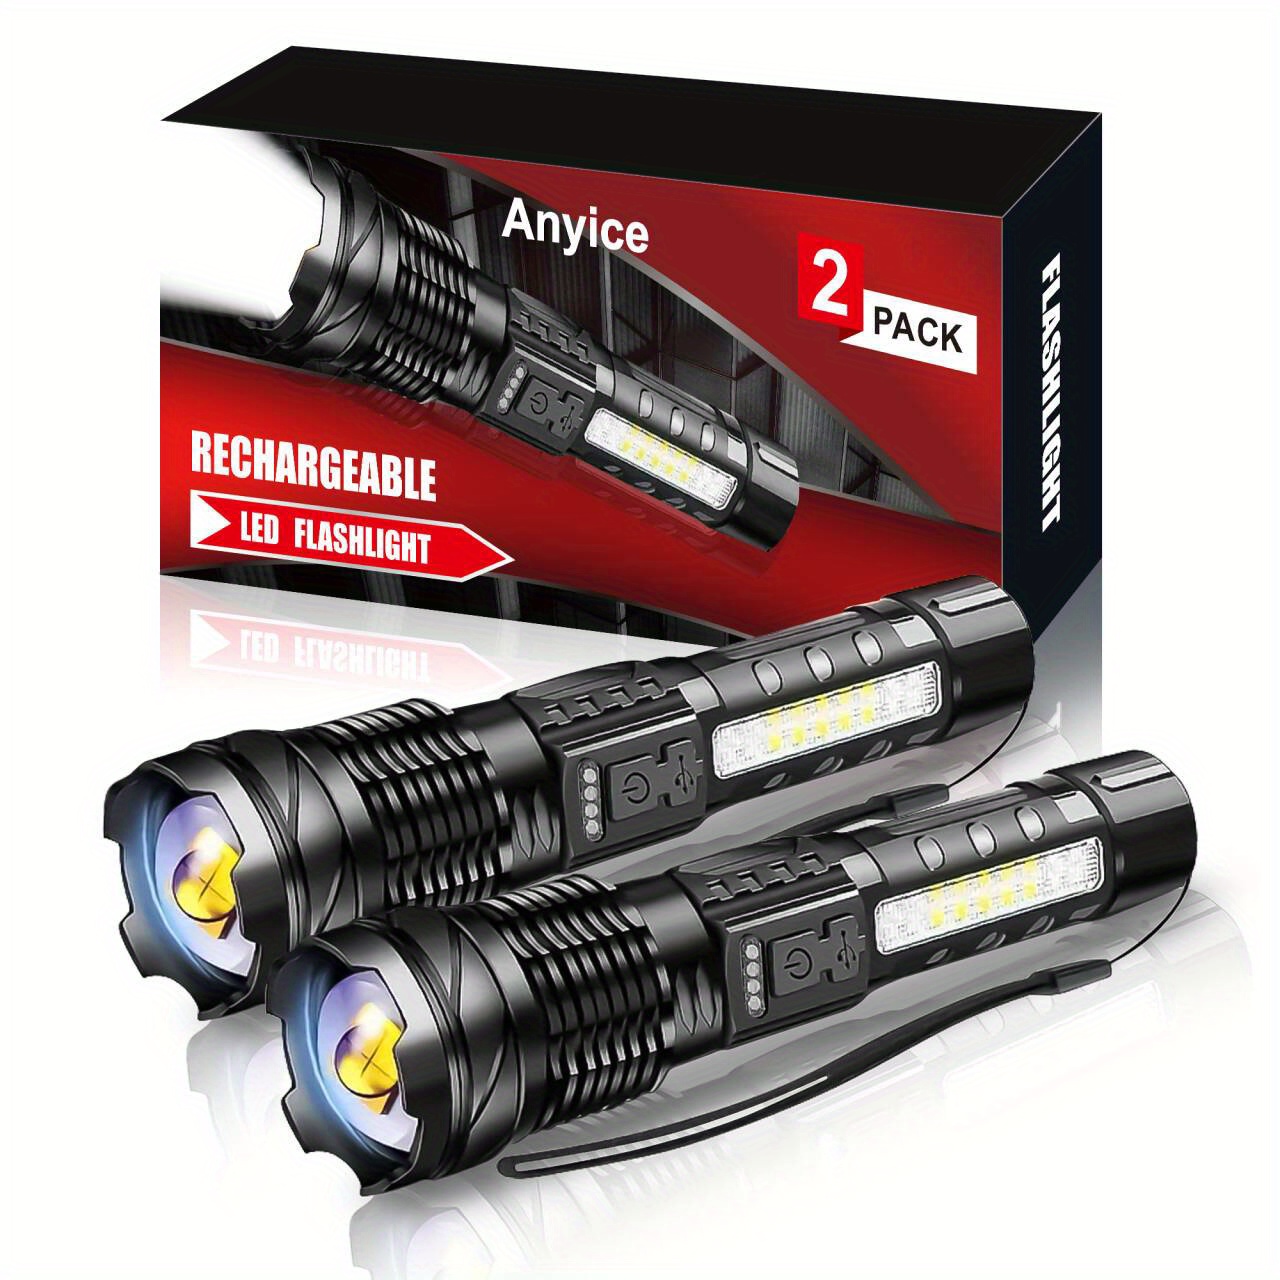 

Anyice 1/2pcs Led Rechargeable Flashlights, Red Blue & White Tricolor Side Light, 7 Lighting Modes And Adjustable Focus, Flashlight For Camping, Fishing, Outdoor & Emergencies